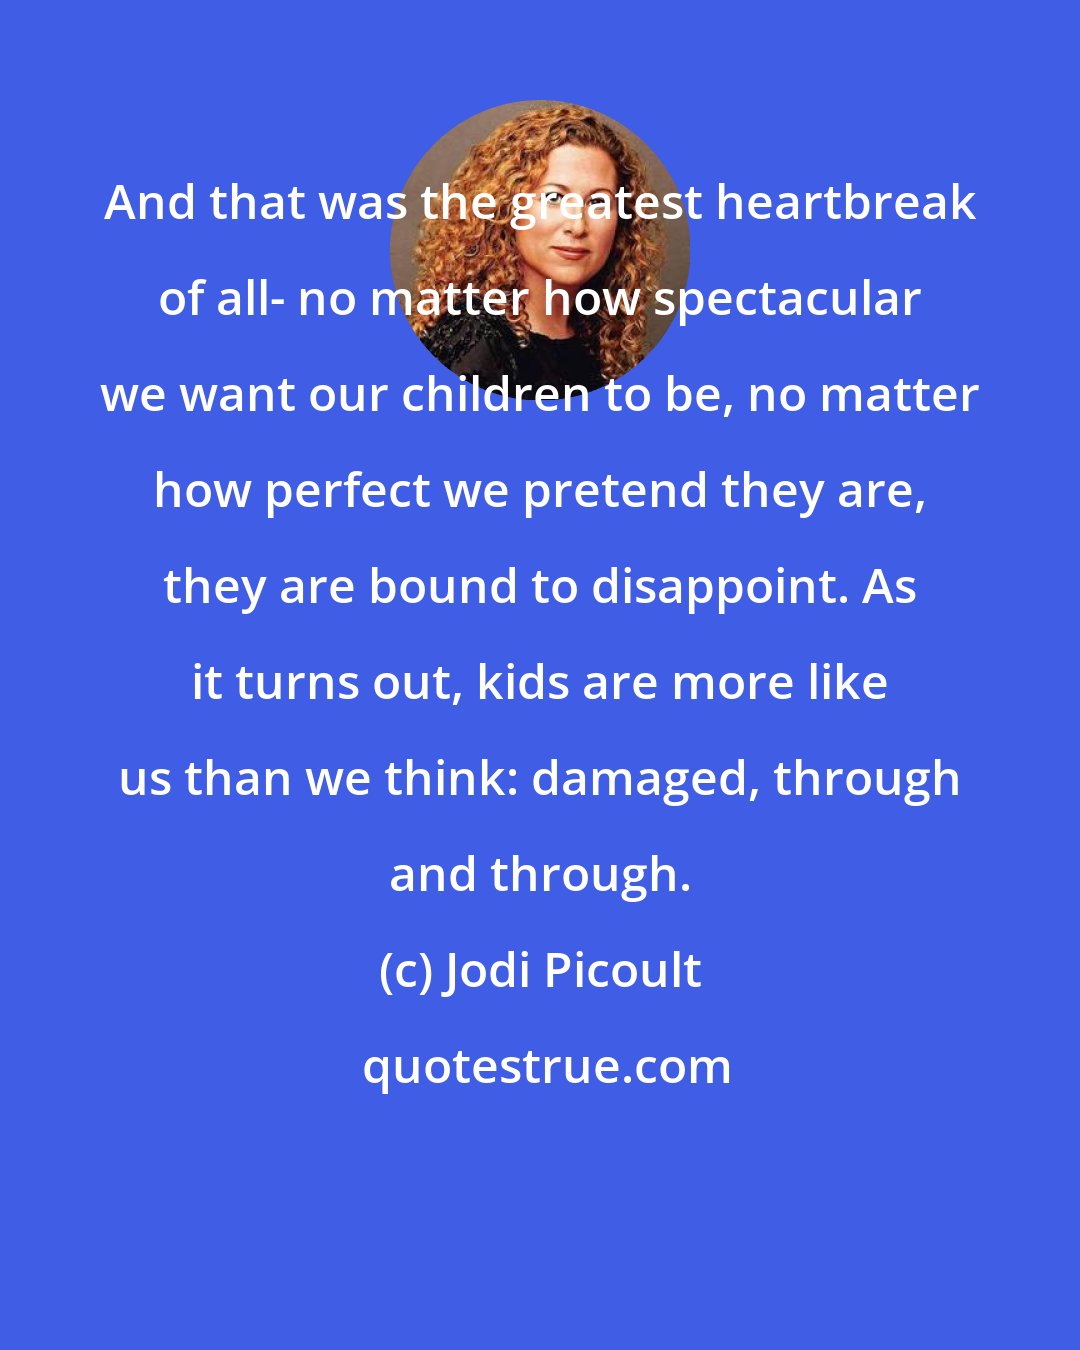 Jodi Picoult: And that was the greatest heartbreak of all- no matter how spectacular we want our children to be, no matter how perfect we pretend they are, they are bound to disappoint. As it turns out, kids are more like us than we think: damaged, through and through.